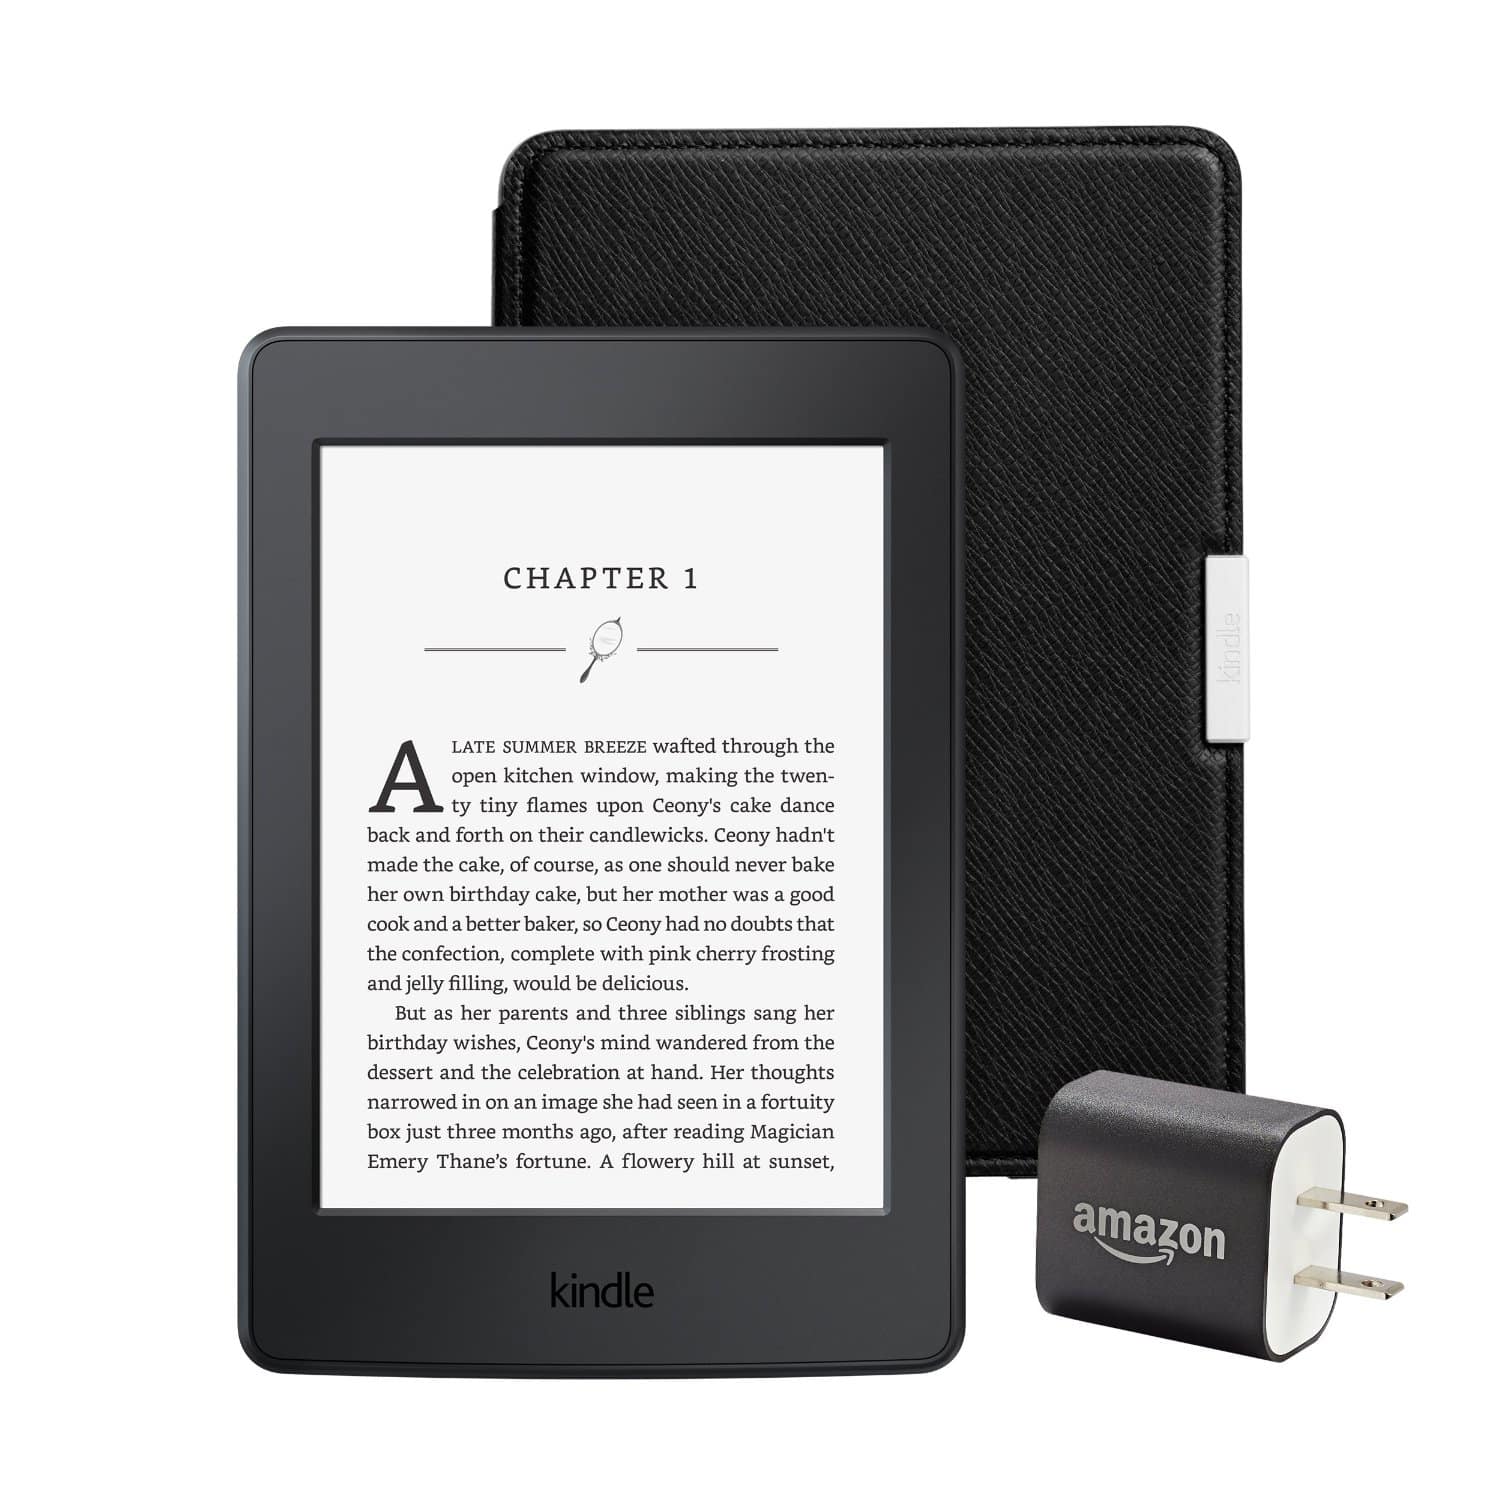 DEAL ALERT: Kindle Paperwhite and all the Essentials Bundle is 33% off!